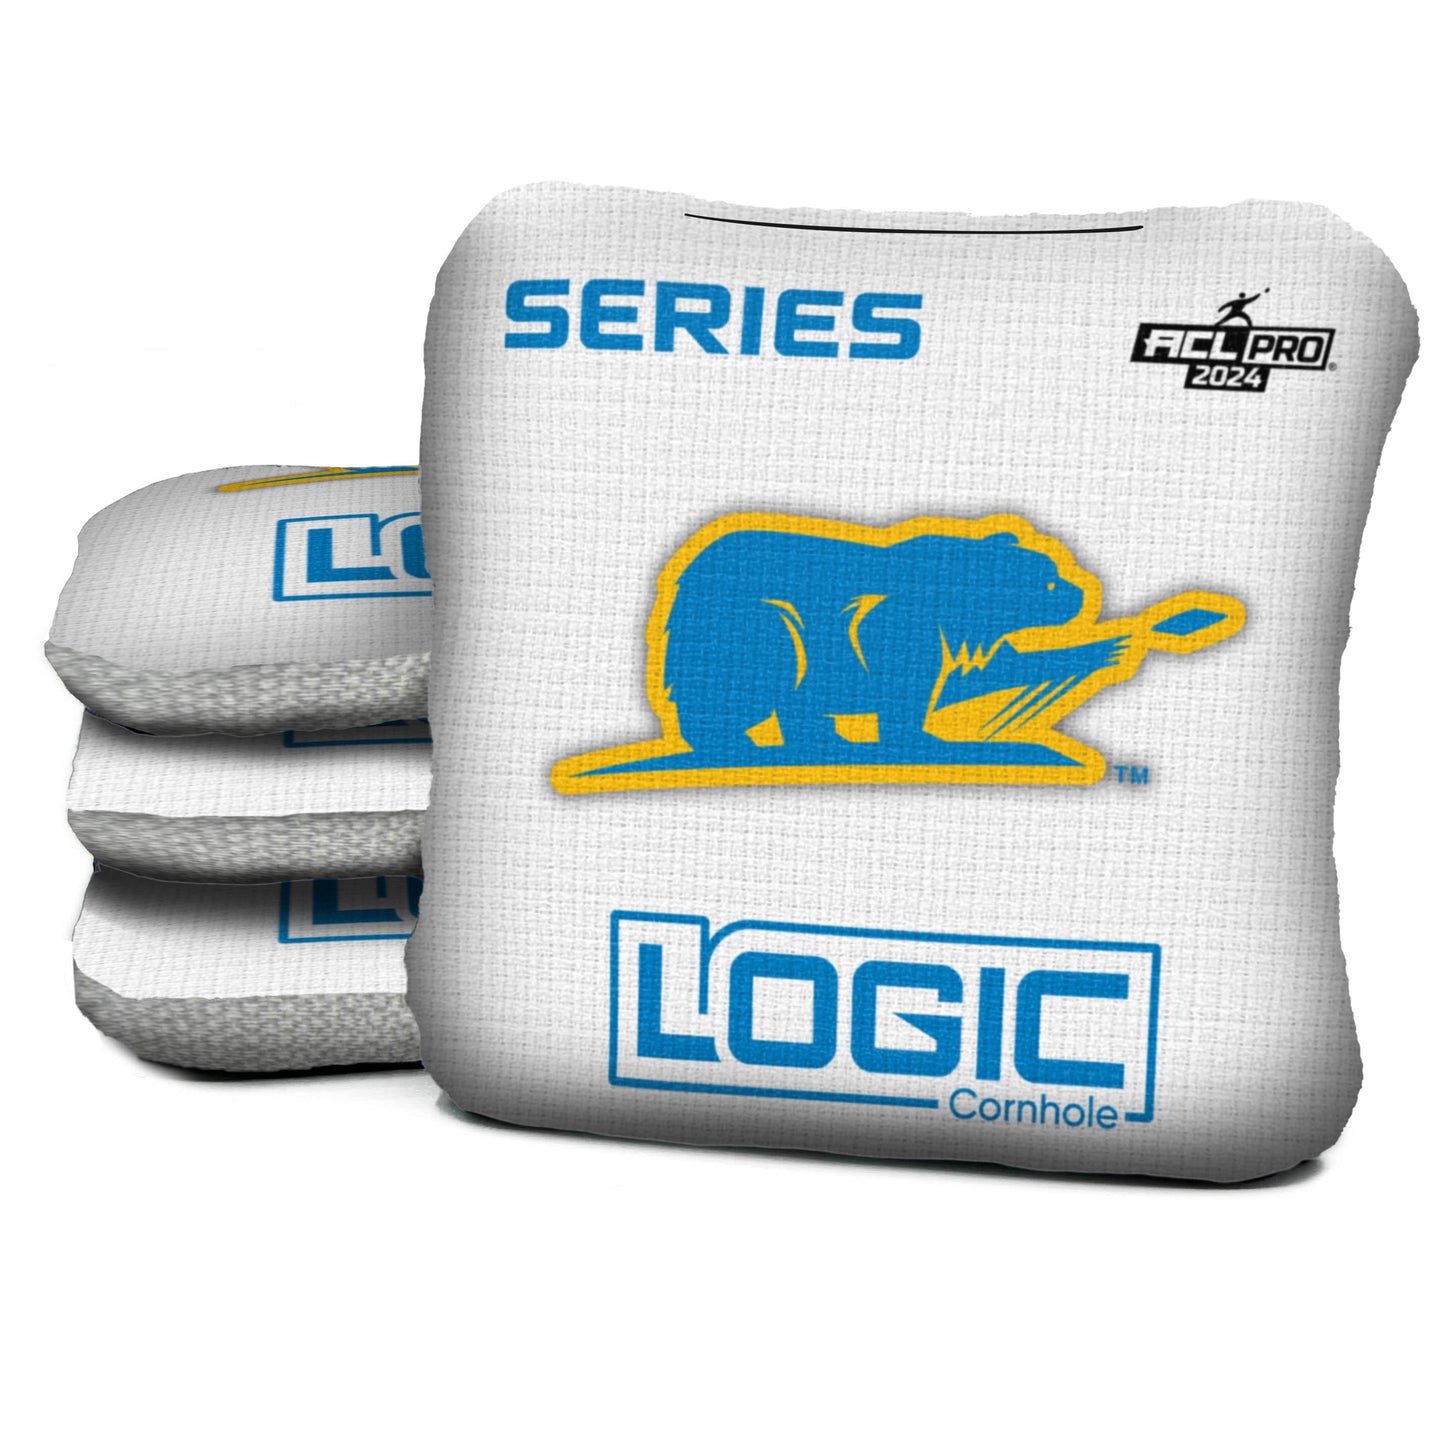 OFFICAL ACL TEAMS BAGS - ACL APPROVED BAGS - Set of 4 bags - MULTIPLE BAG SERIES AVAILABLE